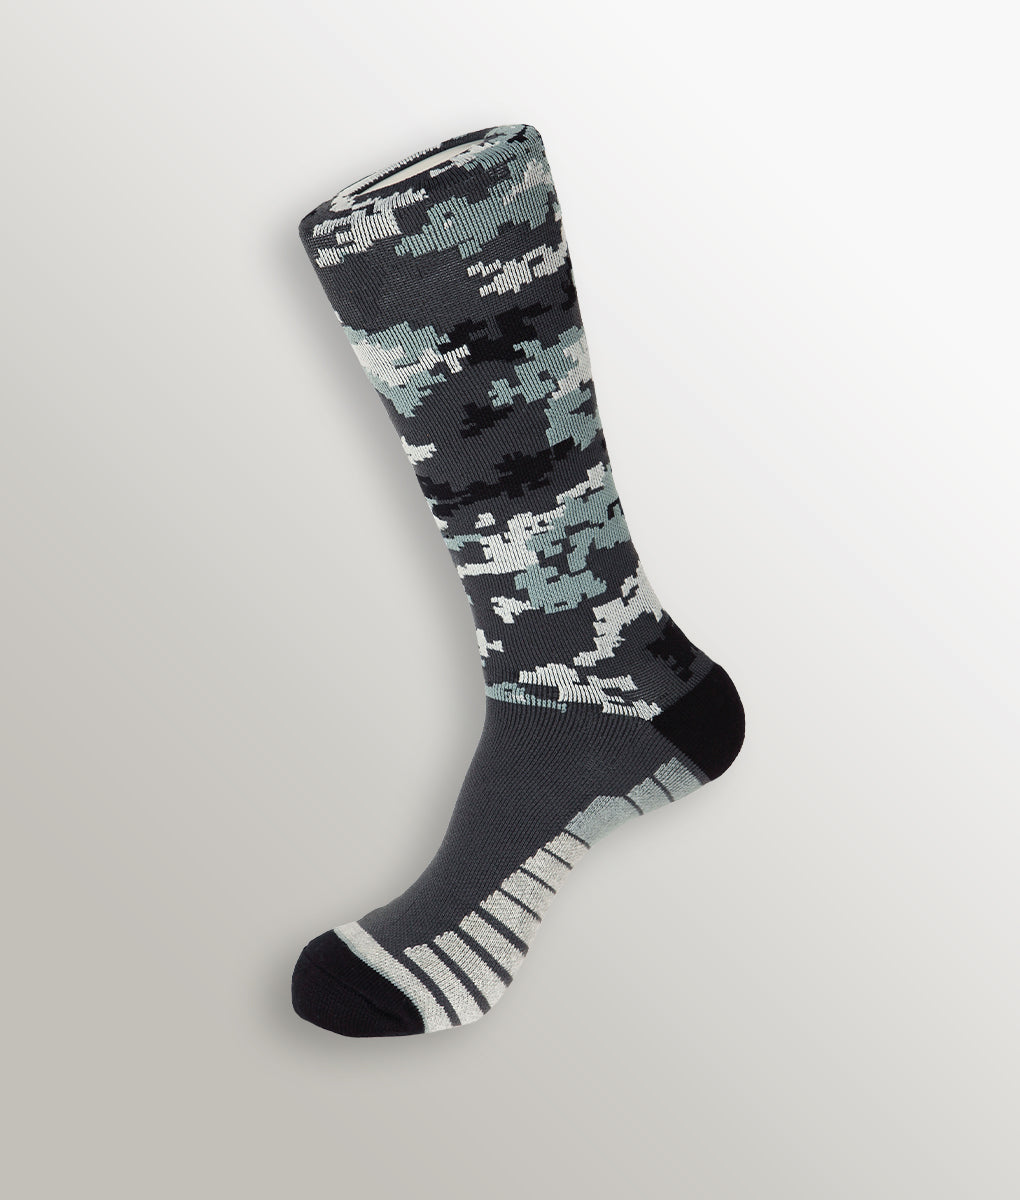 Athletic Sock, Socks – Unsimply Stitched